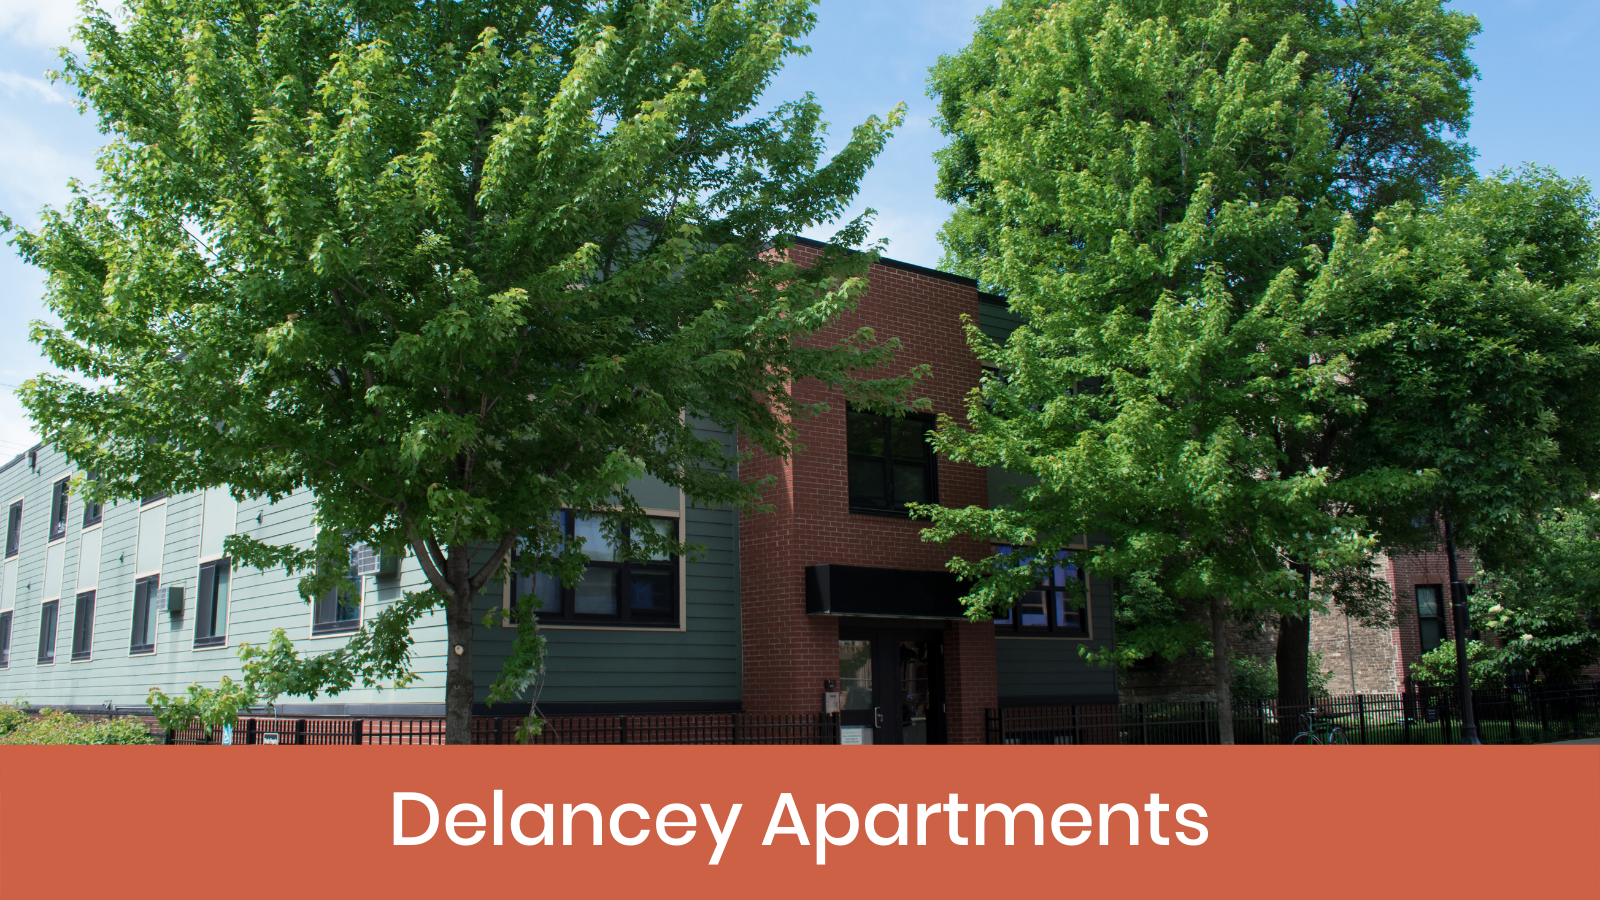 the Delancey Apartments